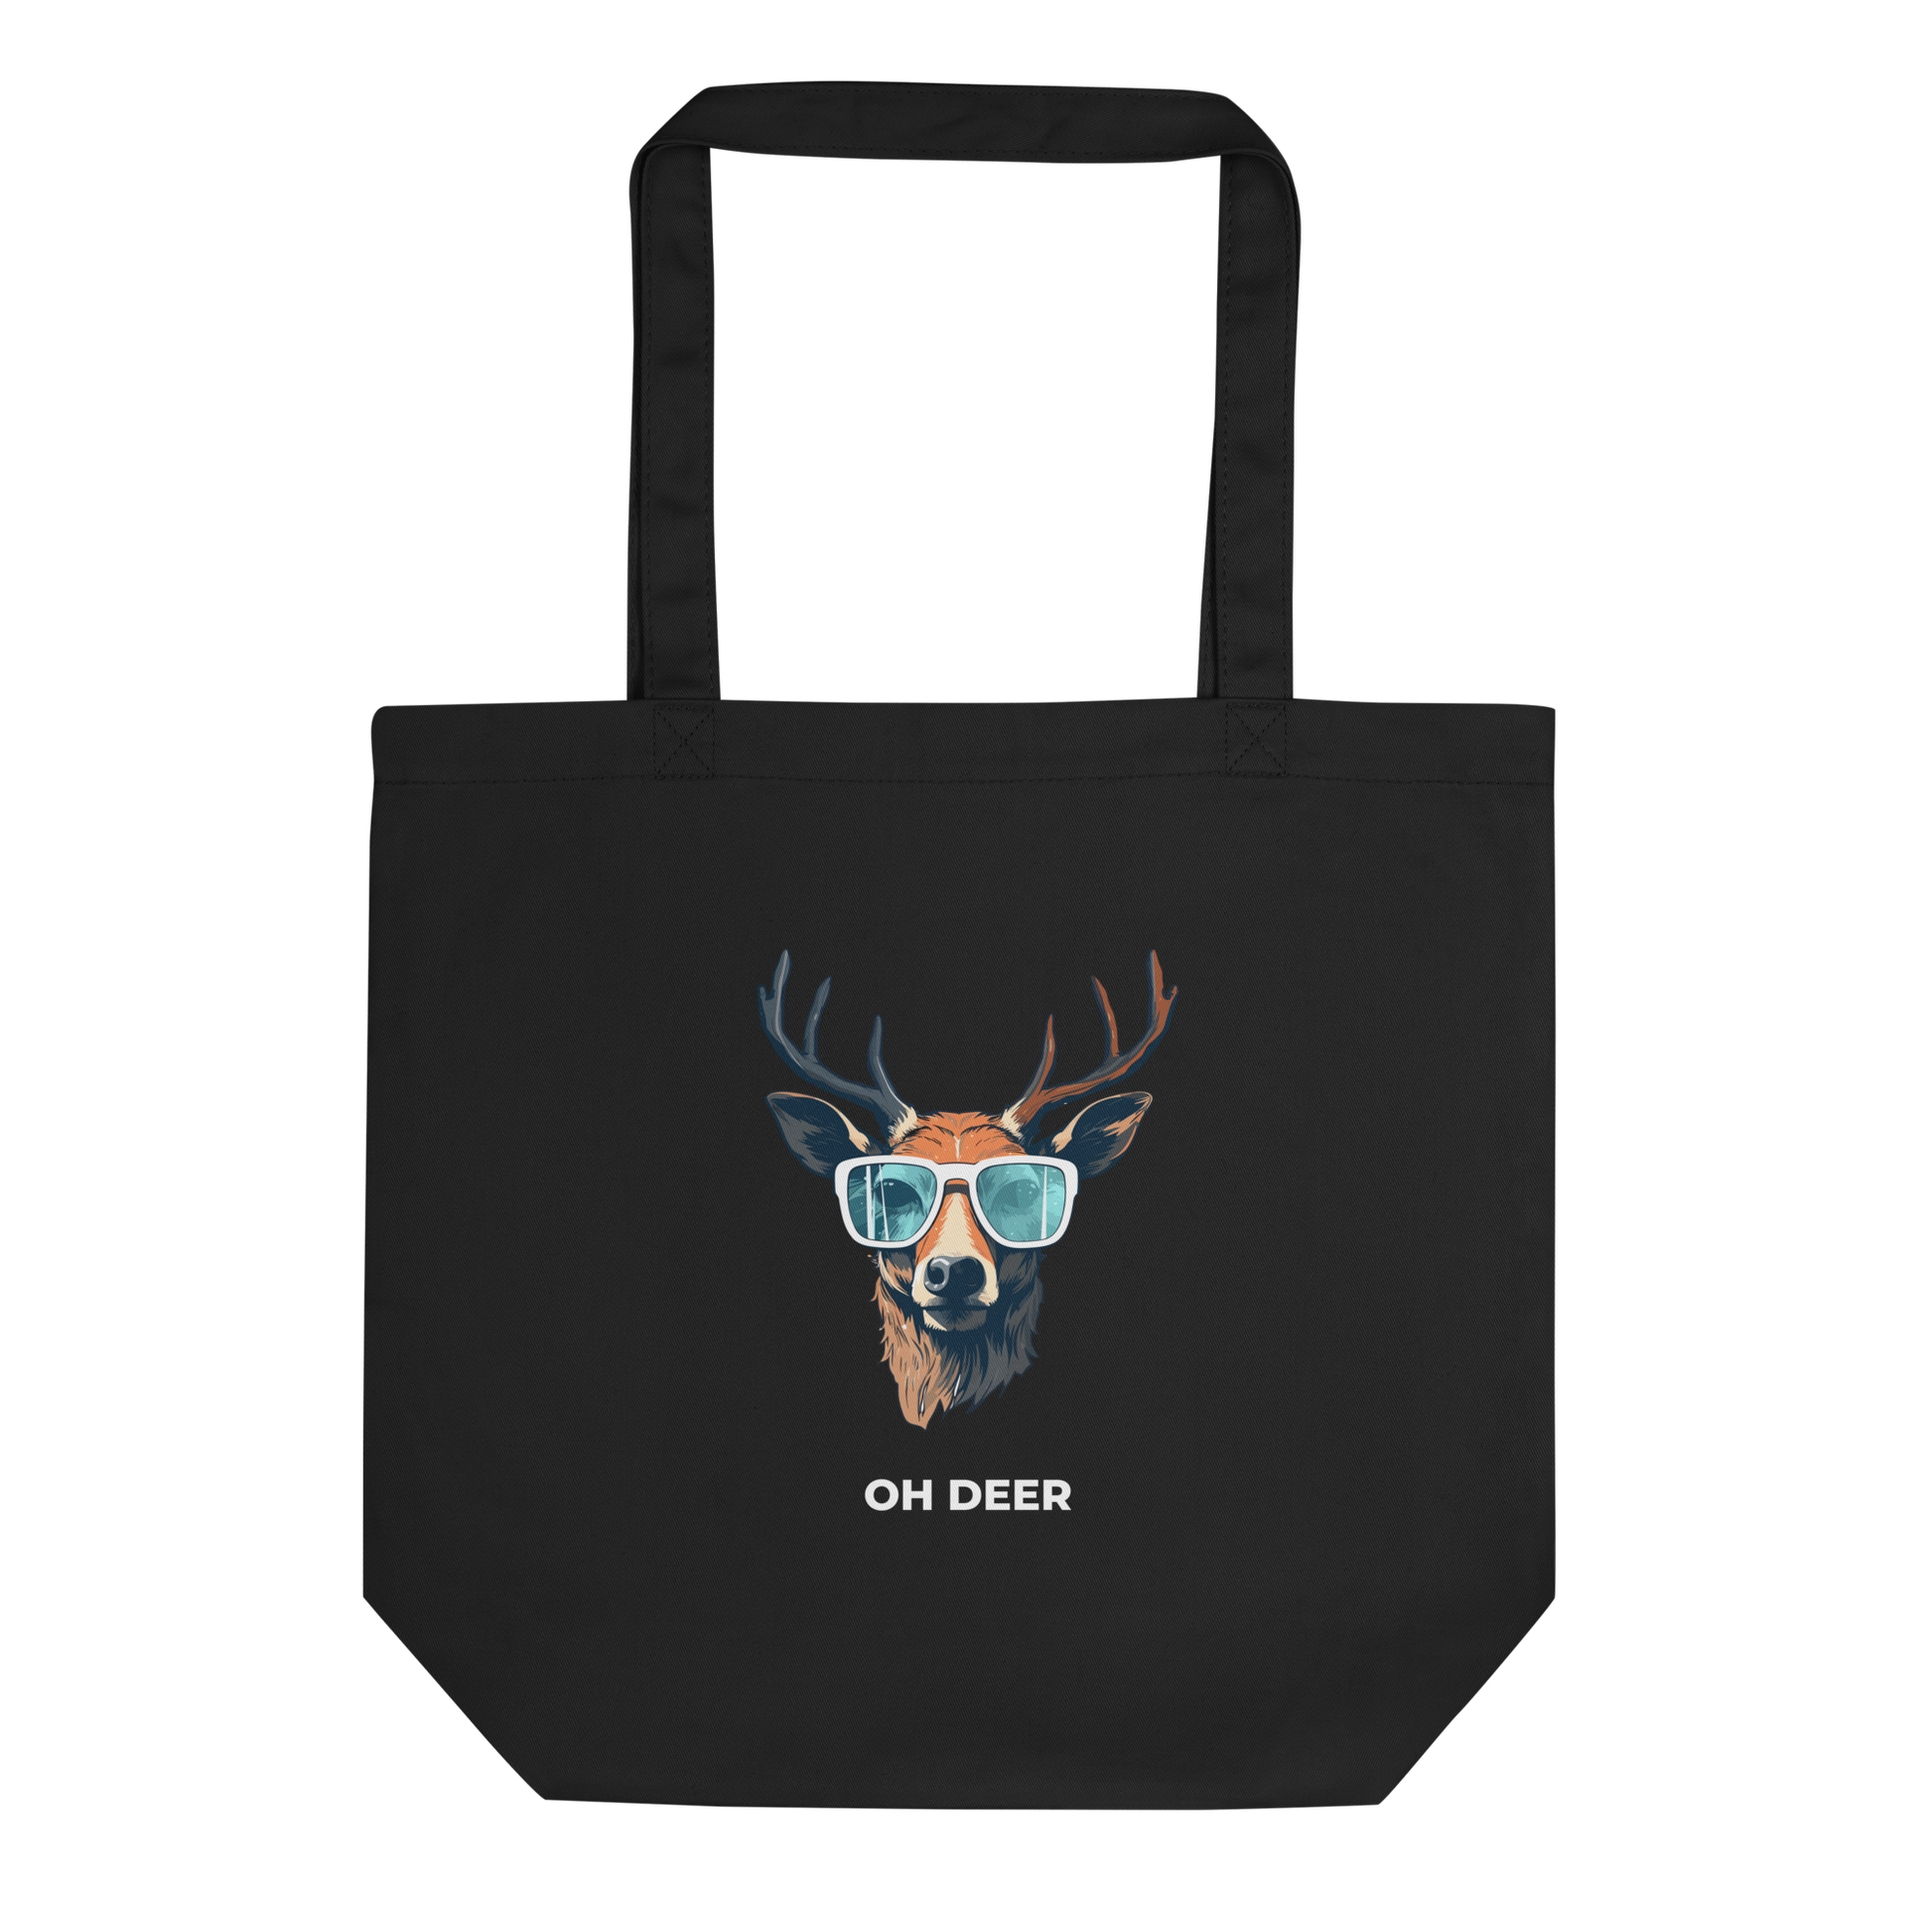 Black Deer Eco Tote Bag featuring a hilarious Oh Deer graphic - Shop Tote Bags Online - Boozy Fox